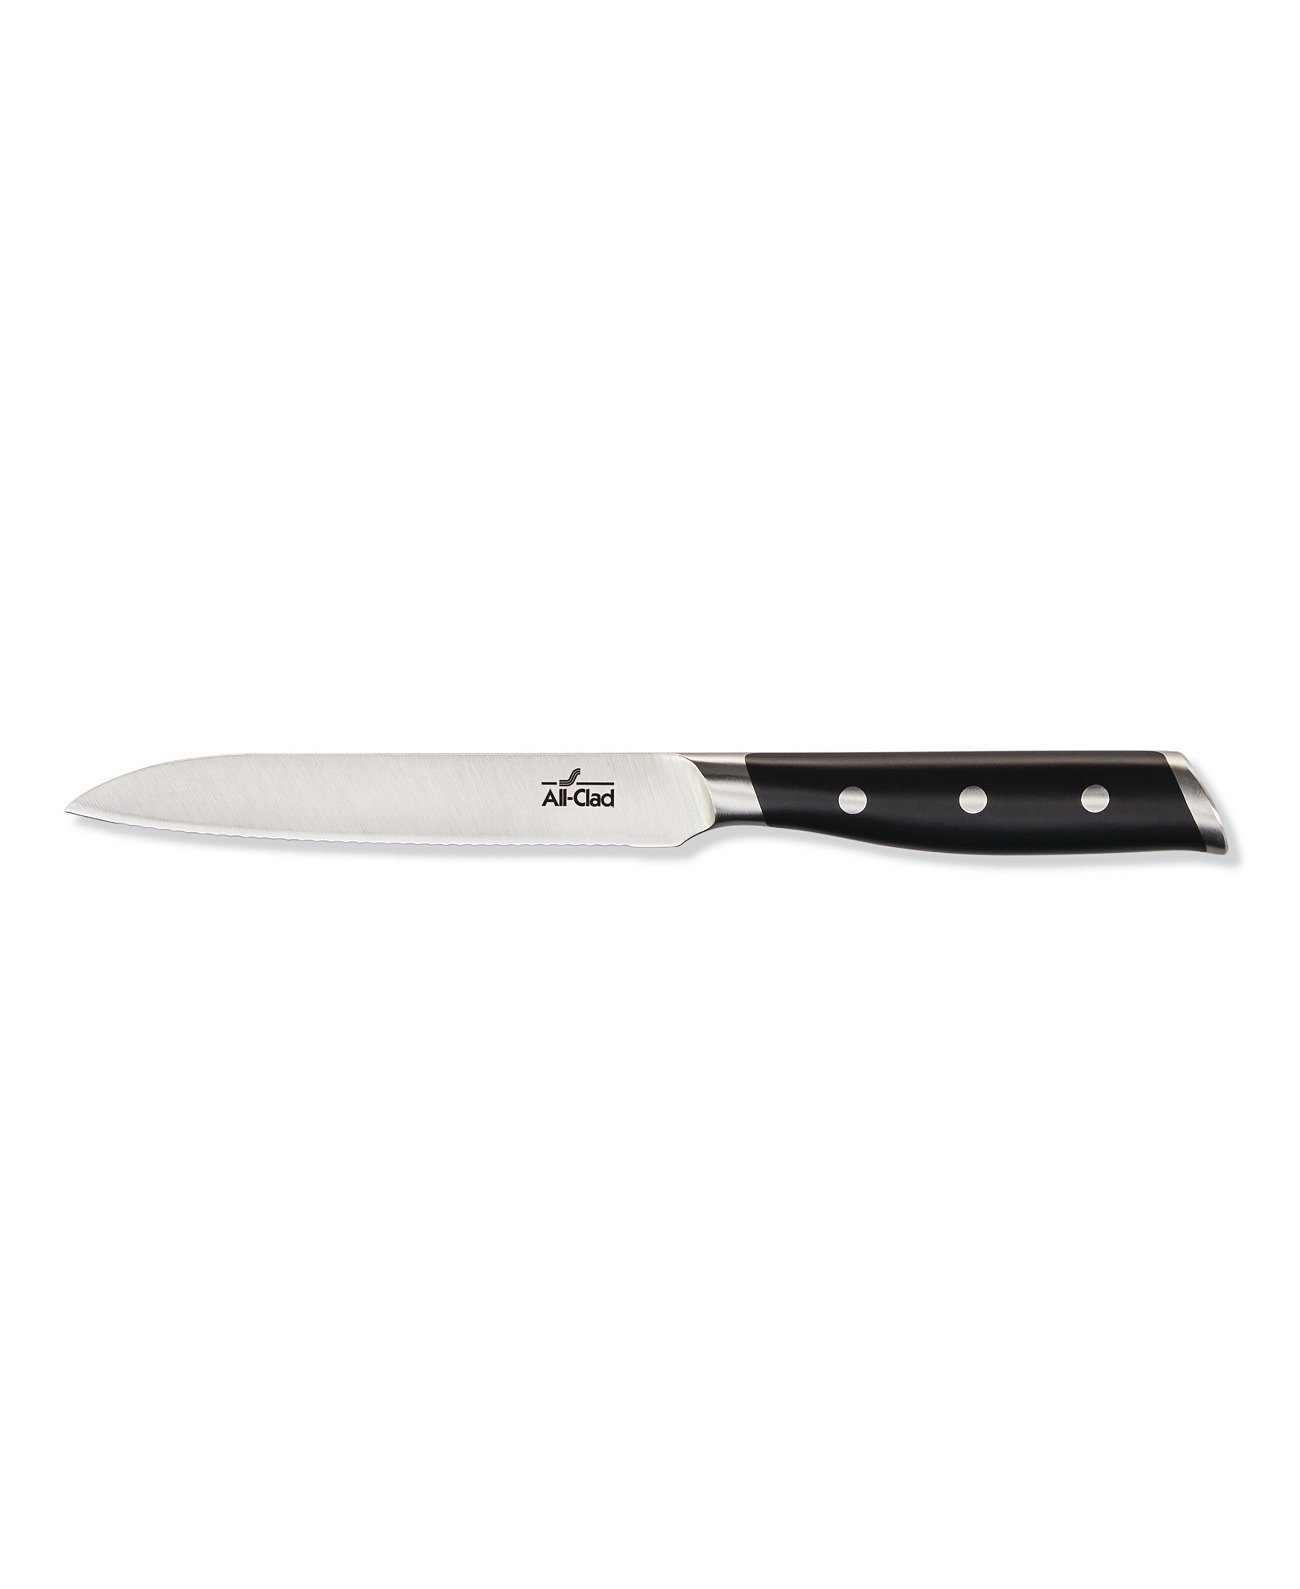 5" Serrated Utility Knife ALL-CLAD